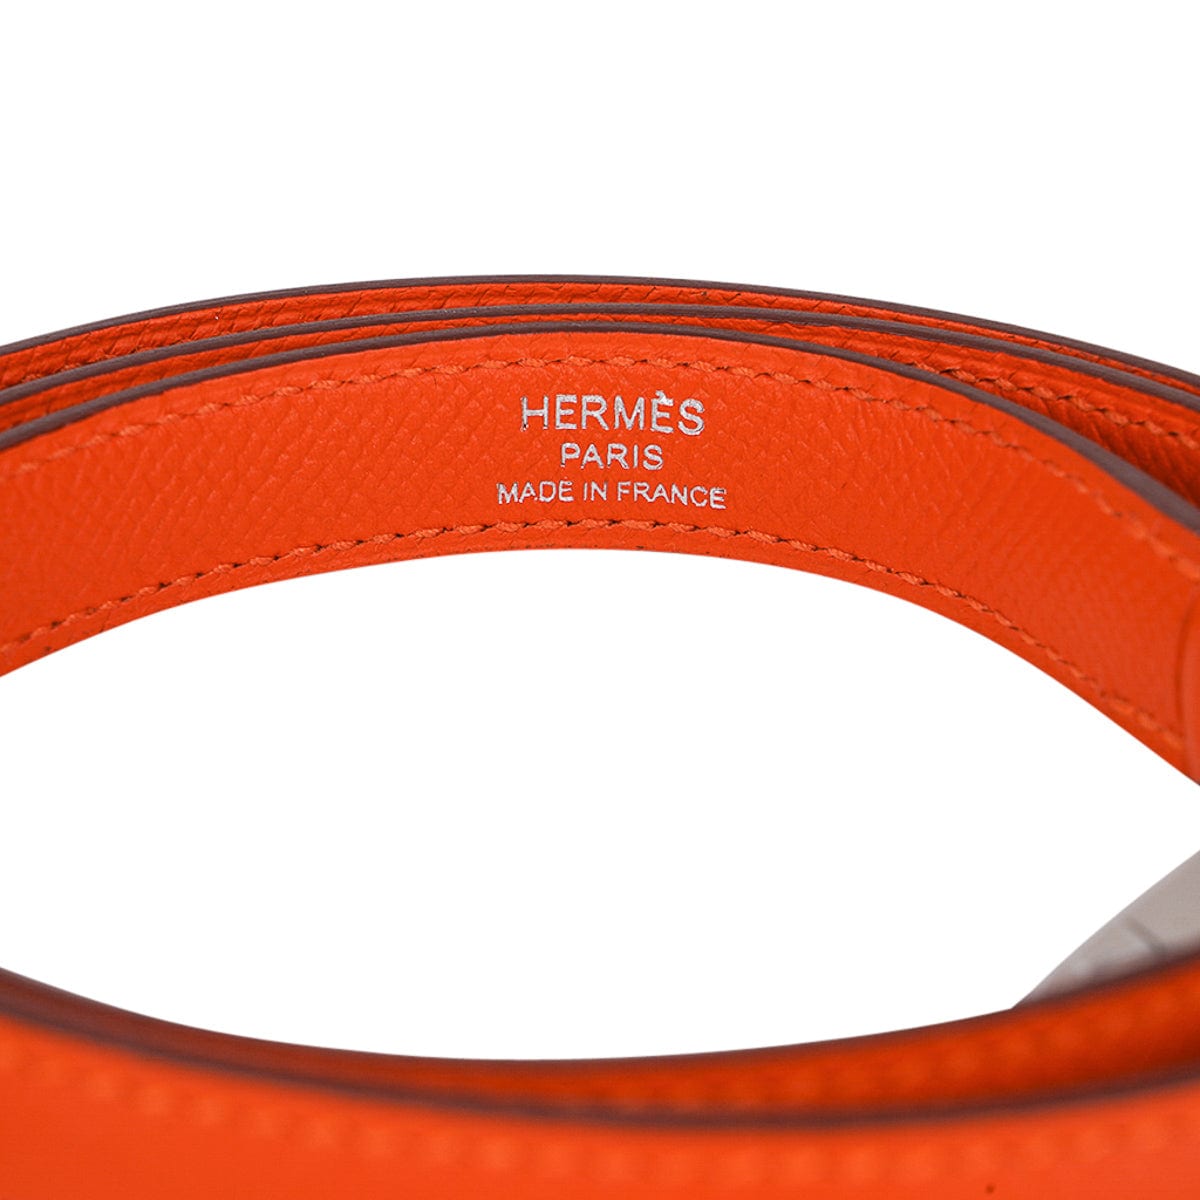 Hermès Gris Perle Sellier Kelly 28cm of Tadelakt Leather with Palladium  Guilloche Hardware, Handbags and Accessories Online, 2019